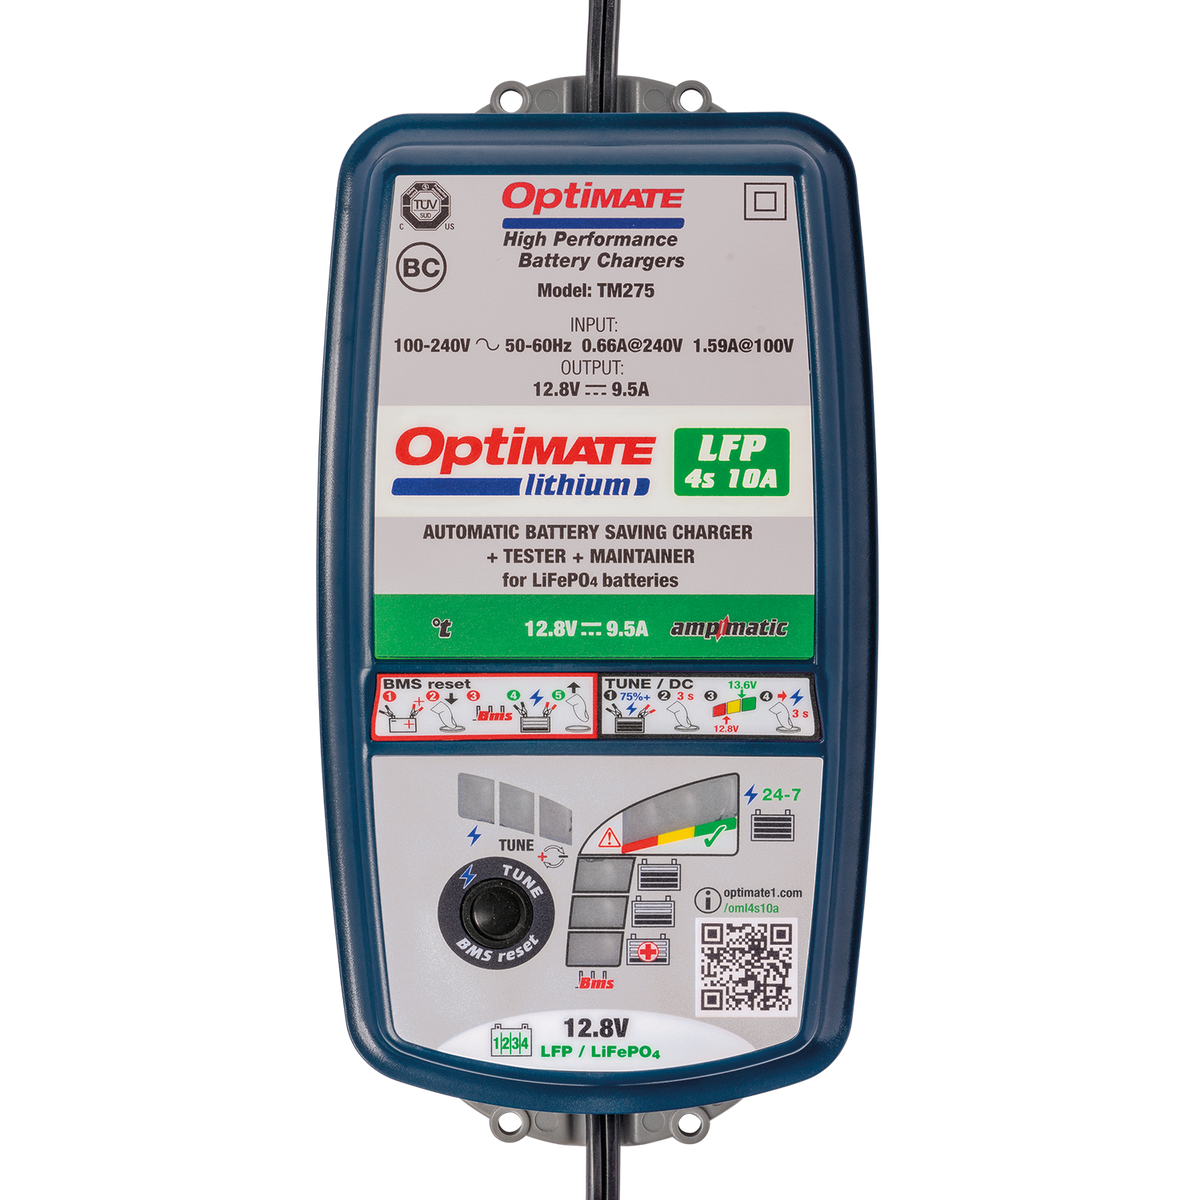 OptiMate Lithium 4s 10A Battery Charger